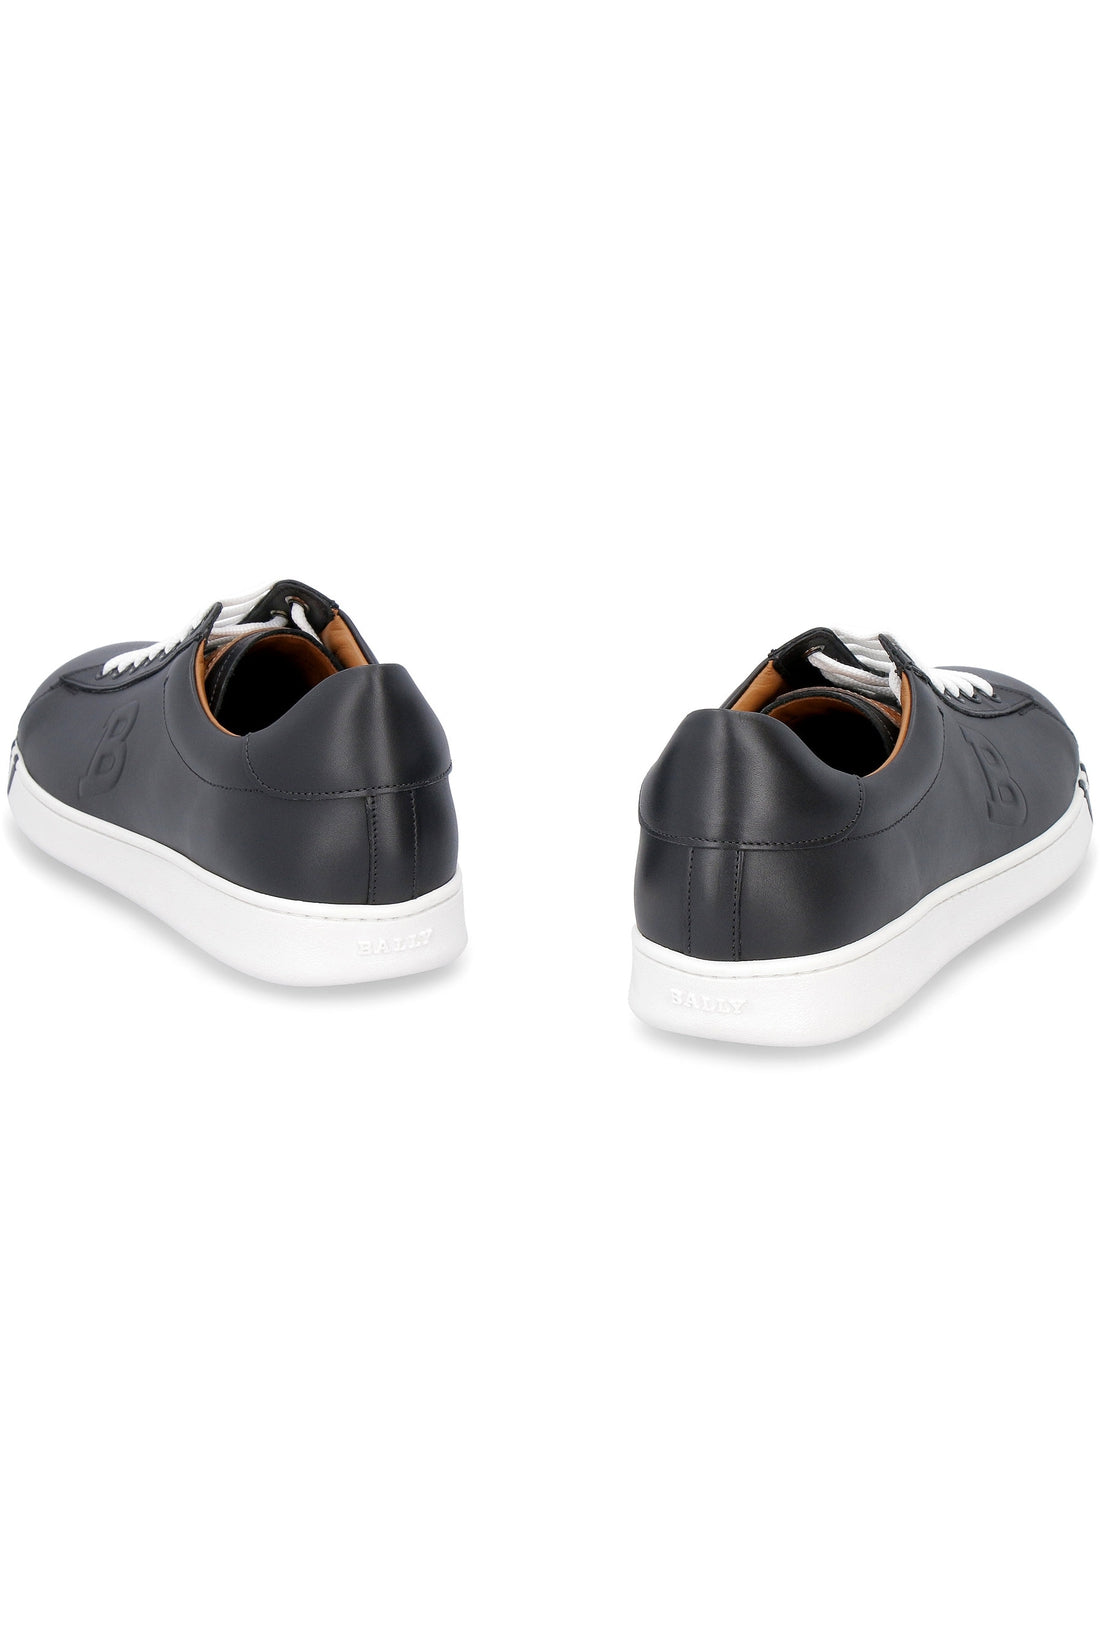 Bally-OUTLET-SALE-Asher leather low-top sneakers-ARCHIVIST